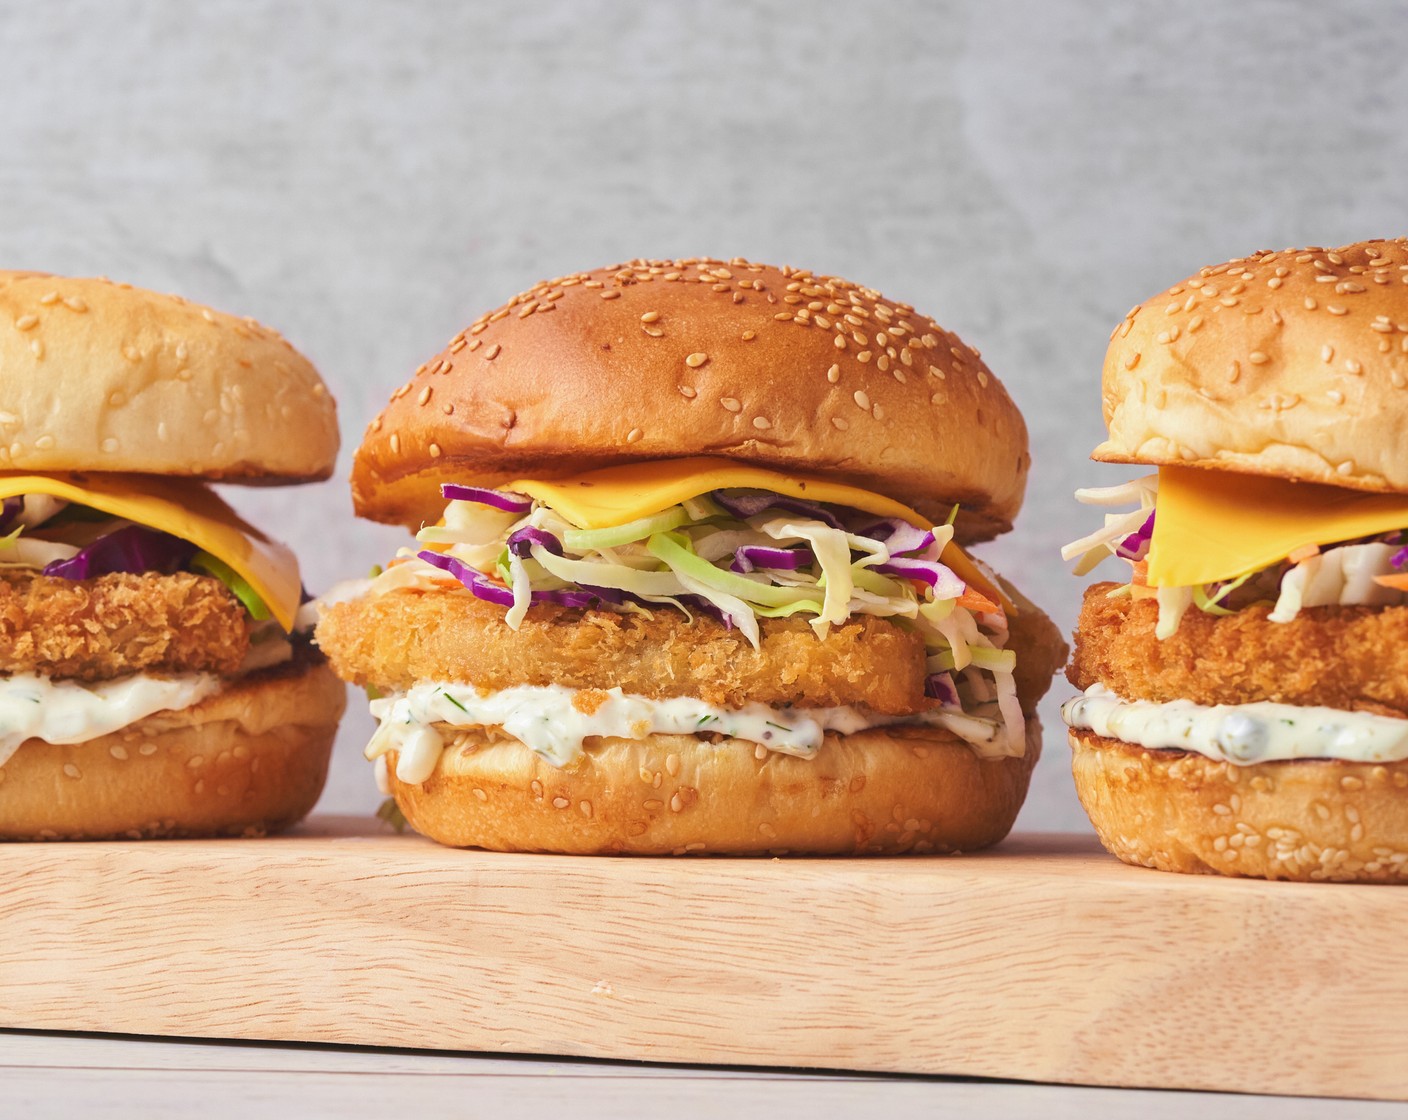 step 4 Stack the fish, Mild Yellow Cheddar (to taste), Tomatoes (to taste), and Coleslaw Mix (to taste) and top with the top bun. Repeat this process on the remaining buns and filets. Serve with fries or salad, and enjoy right away!